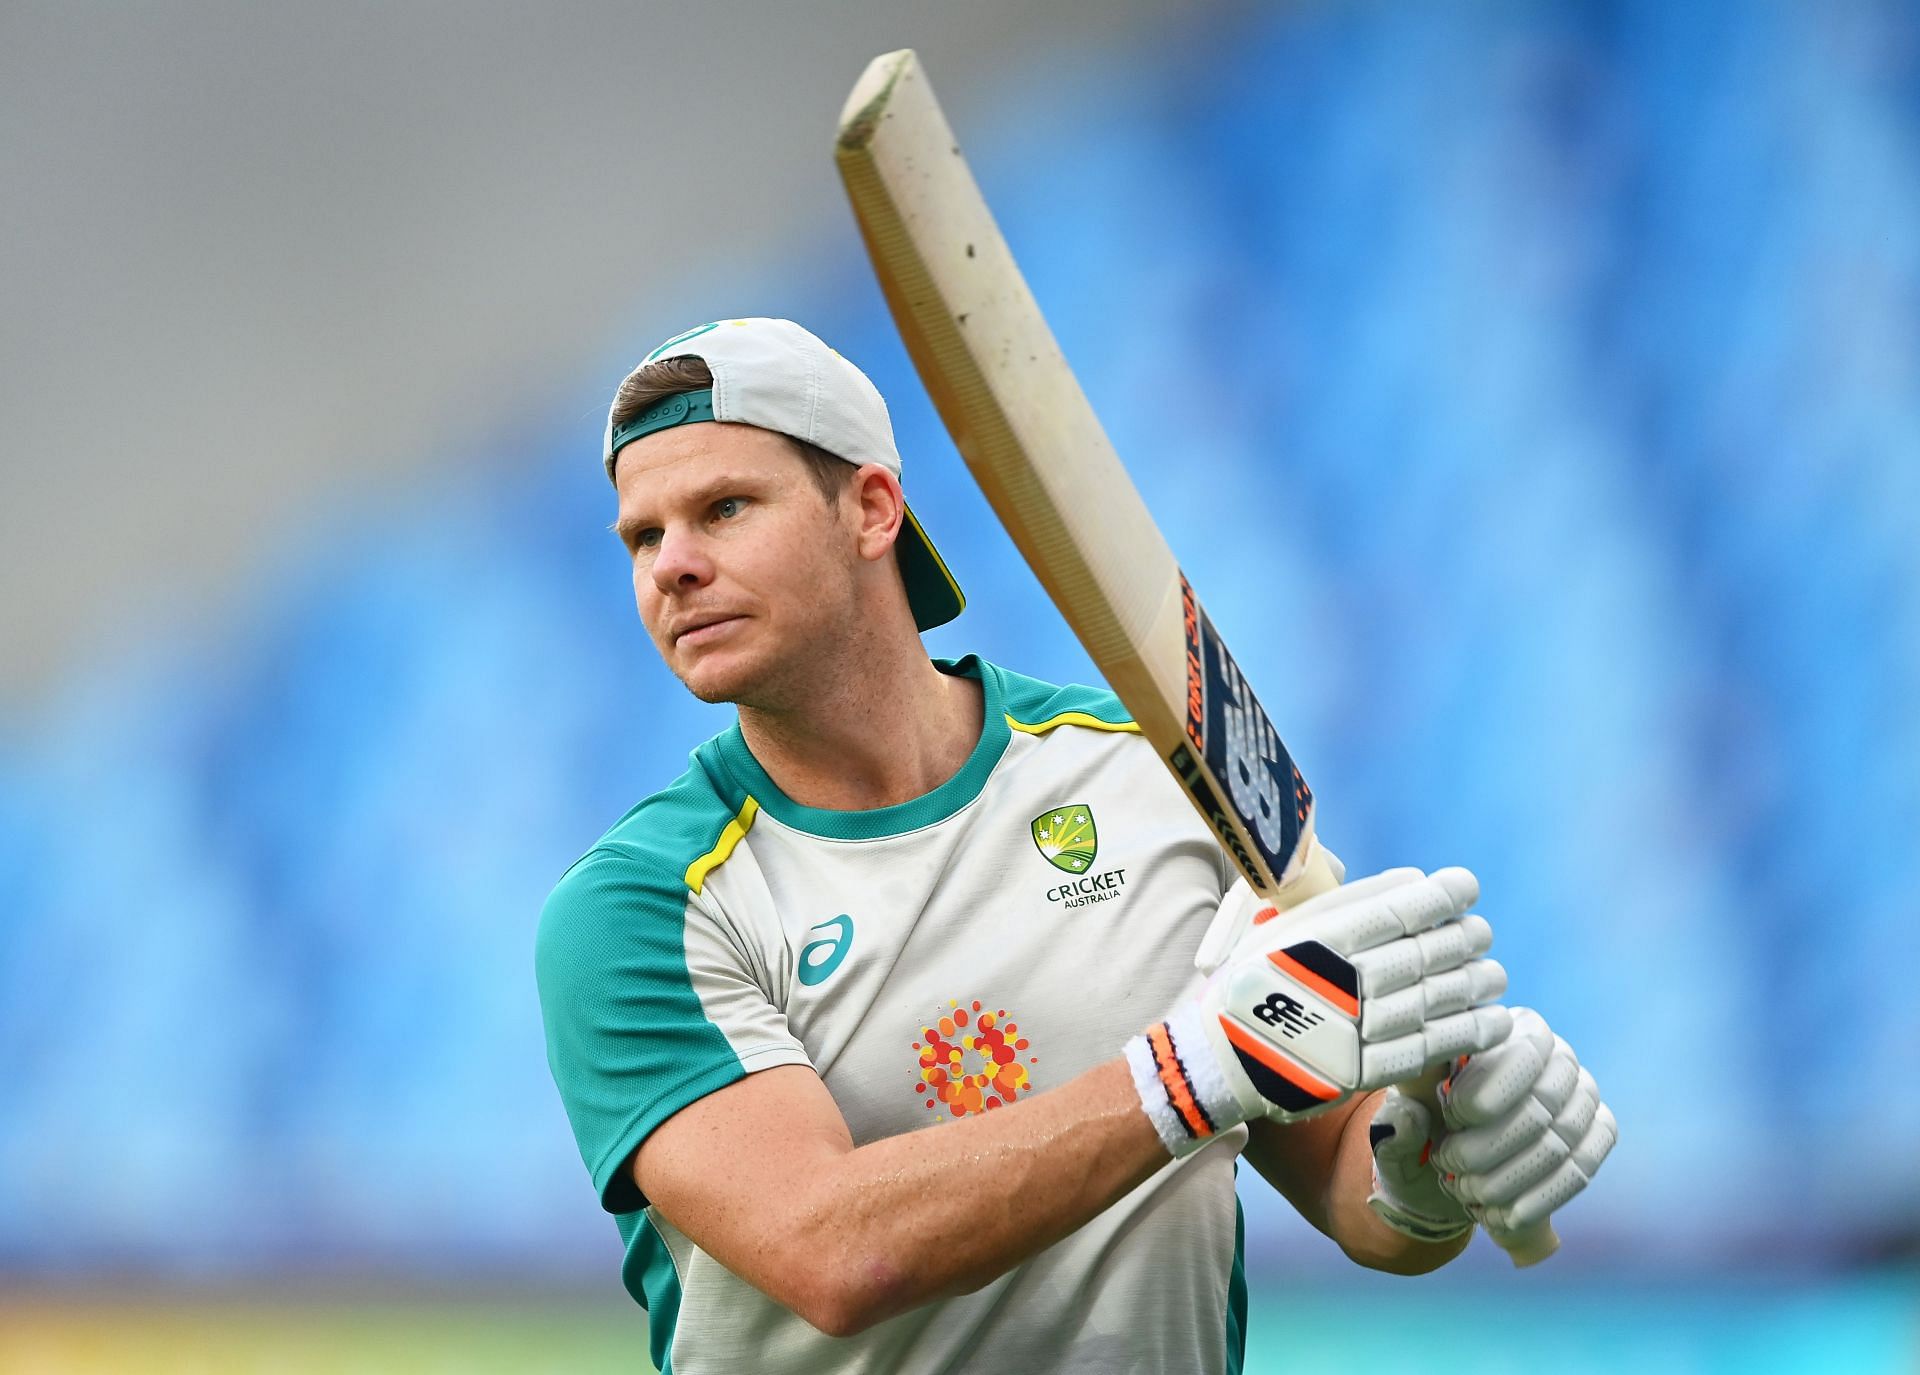 Steve Smith has a decent record in ICC knockout matches